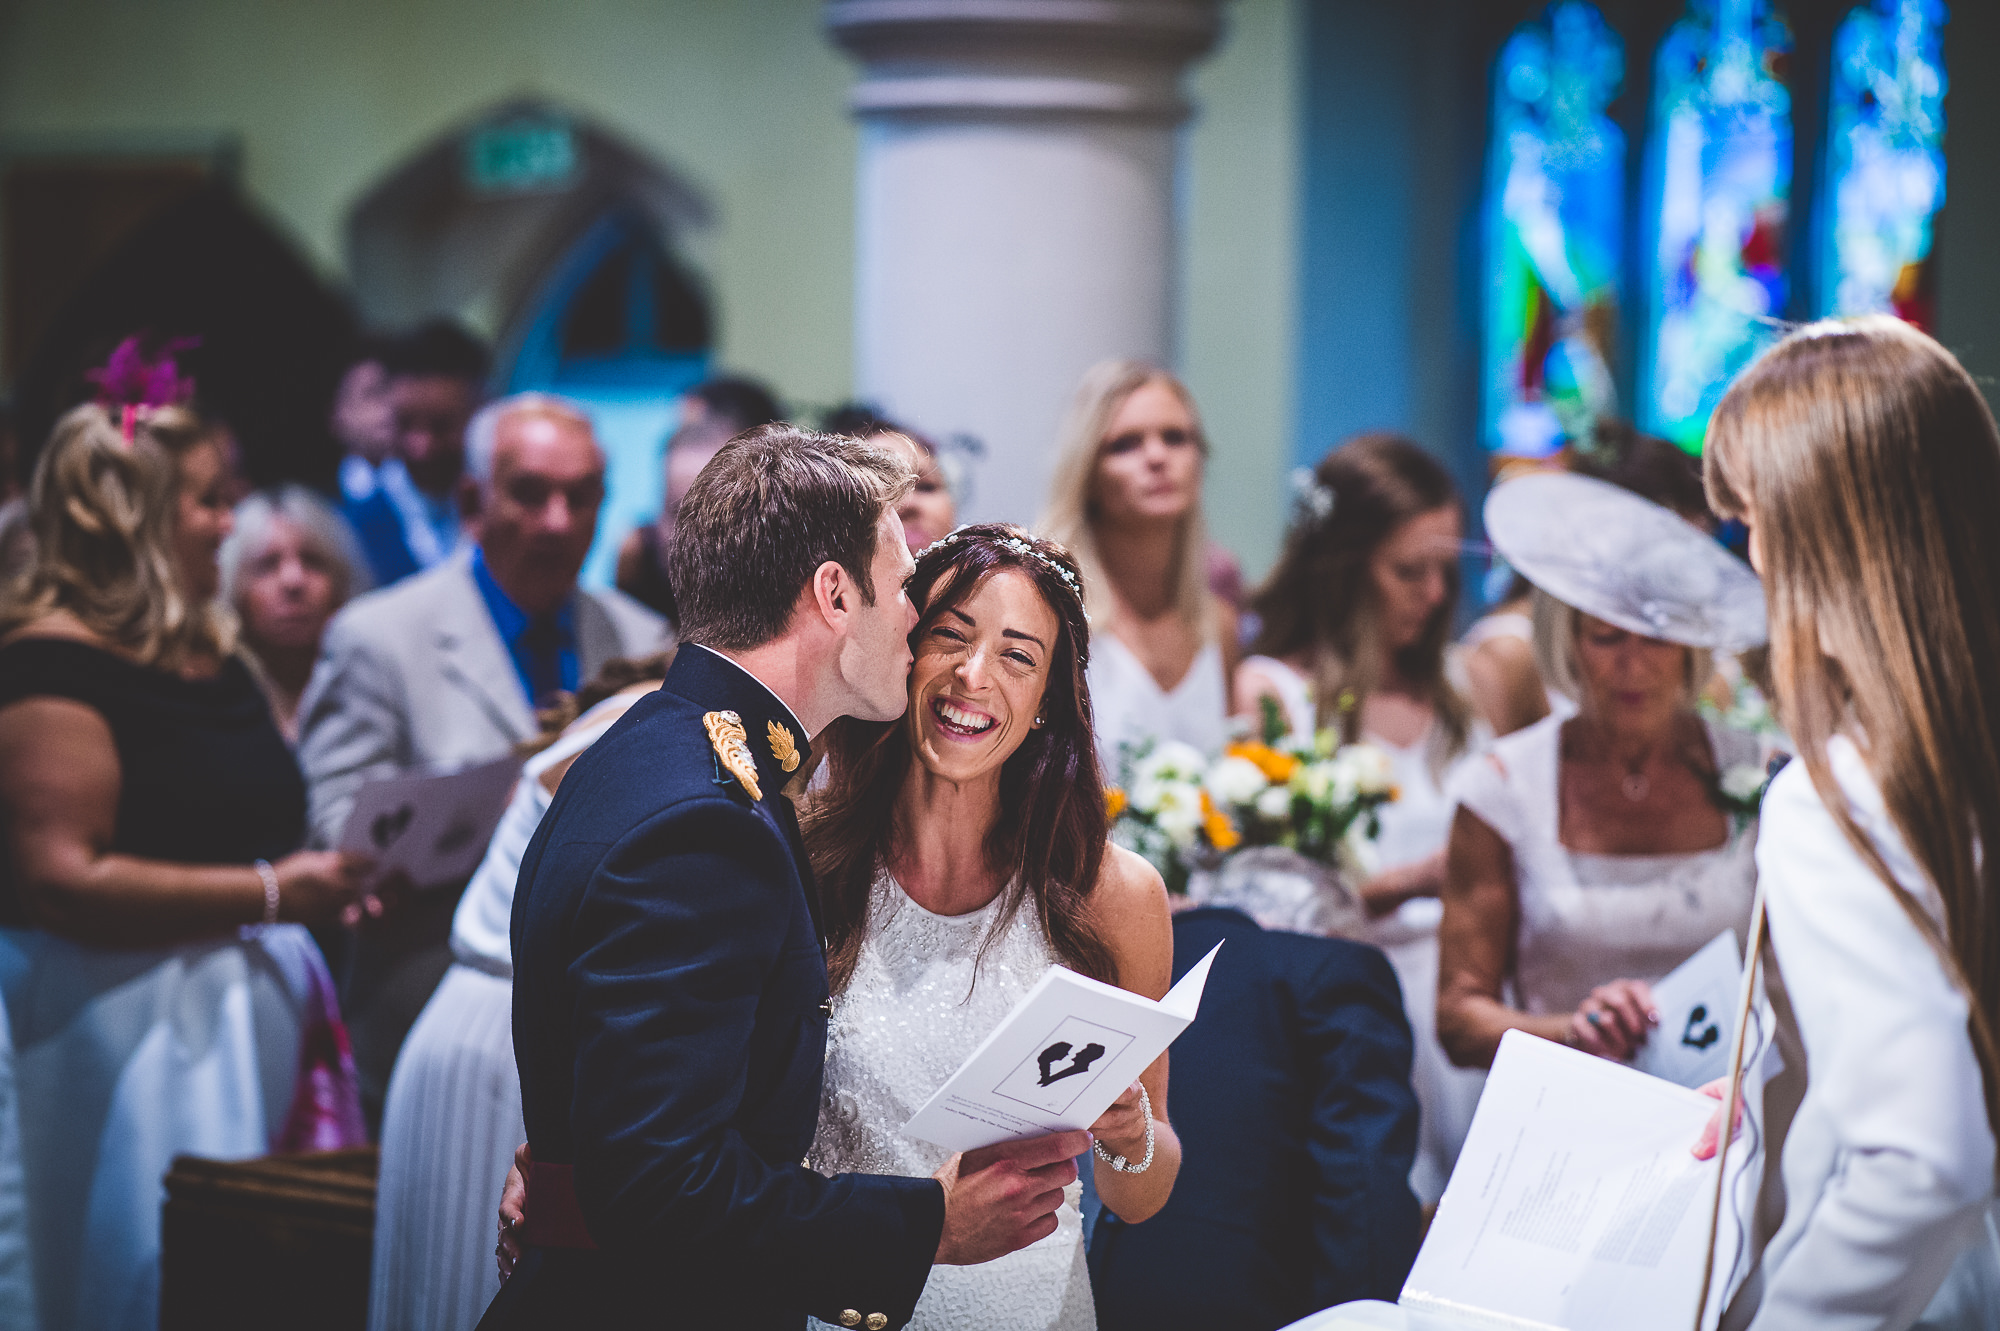 A wedding photographer captures a heartfelt moment as a bride and groom exchange vows in a church.